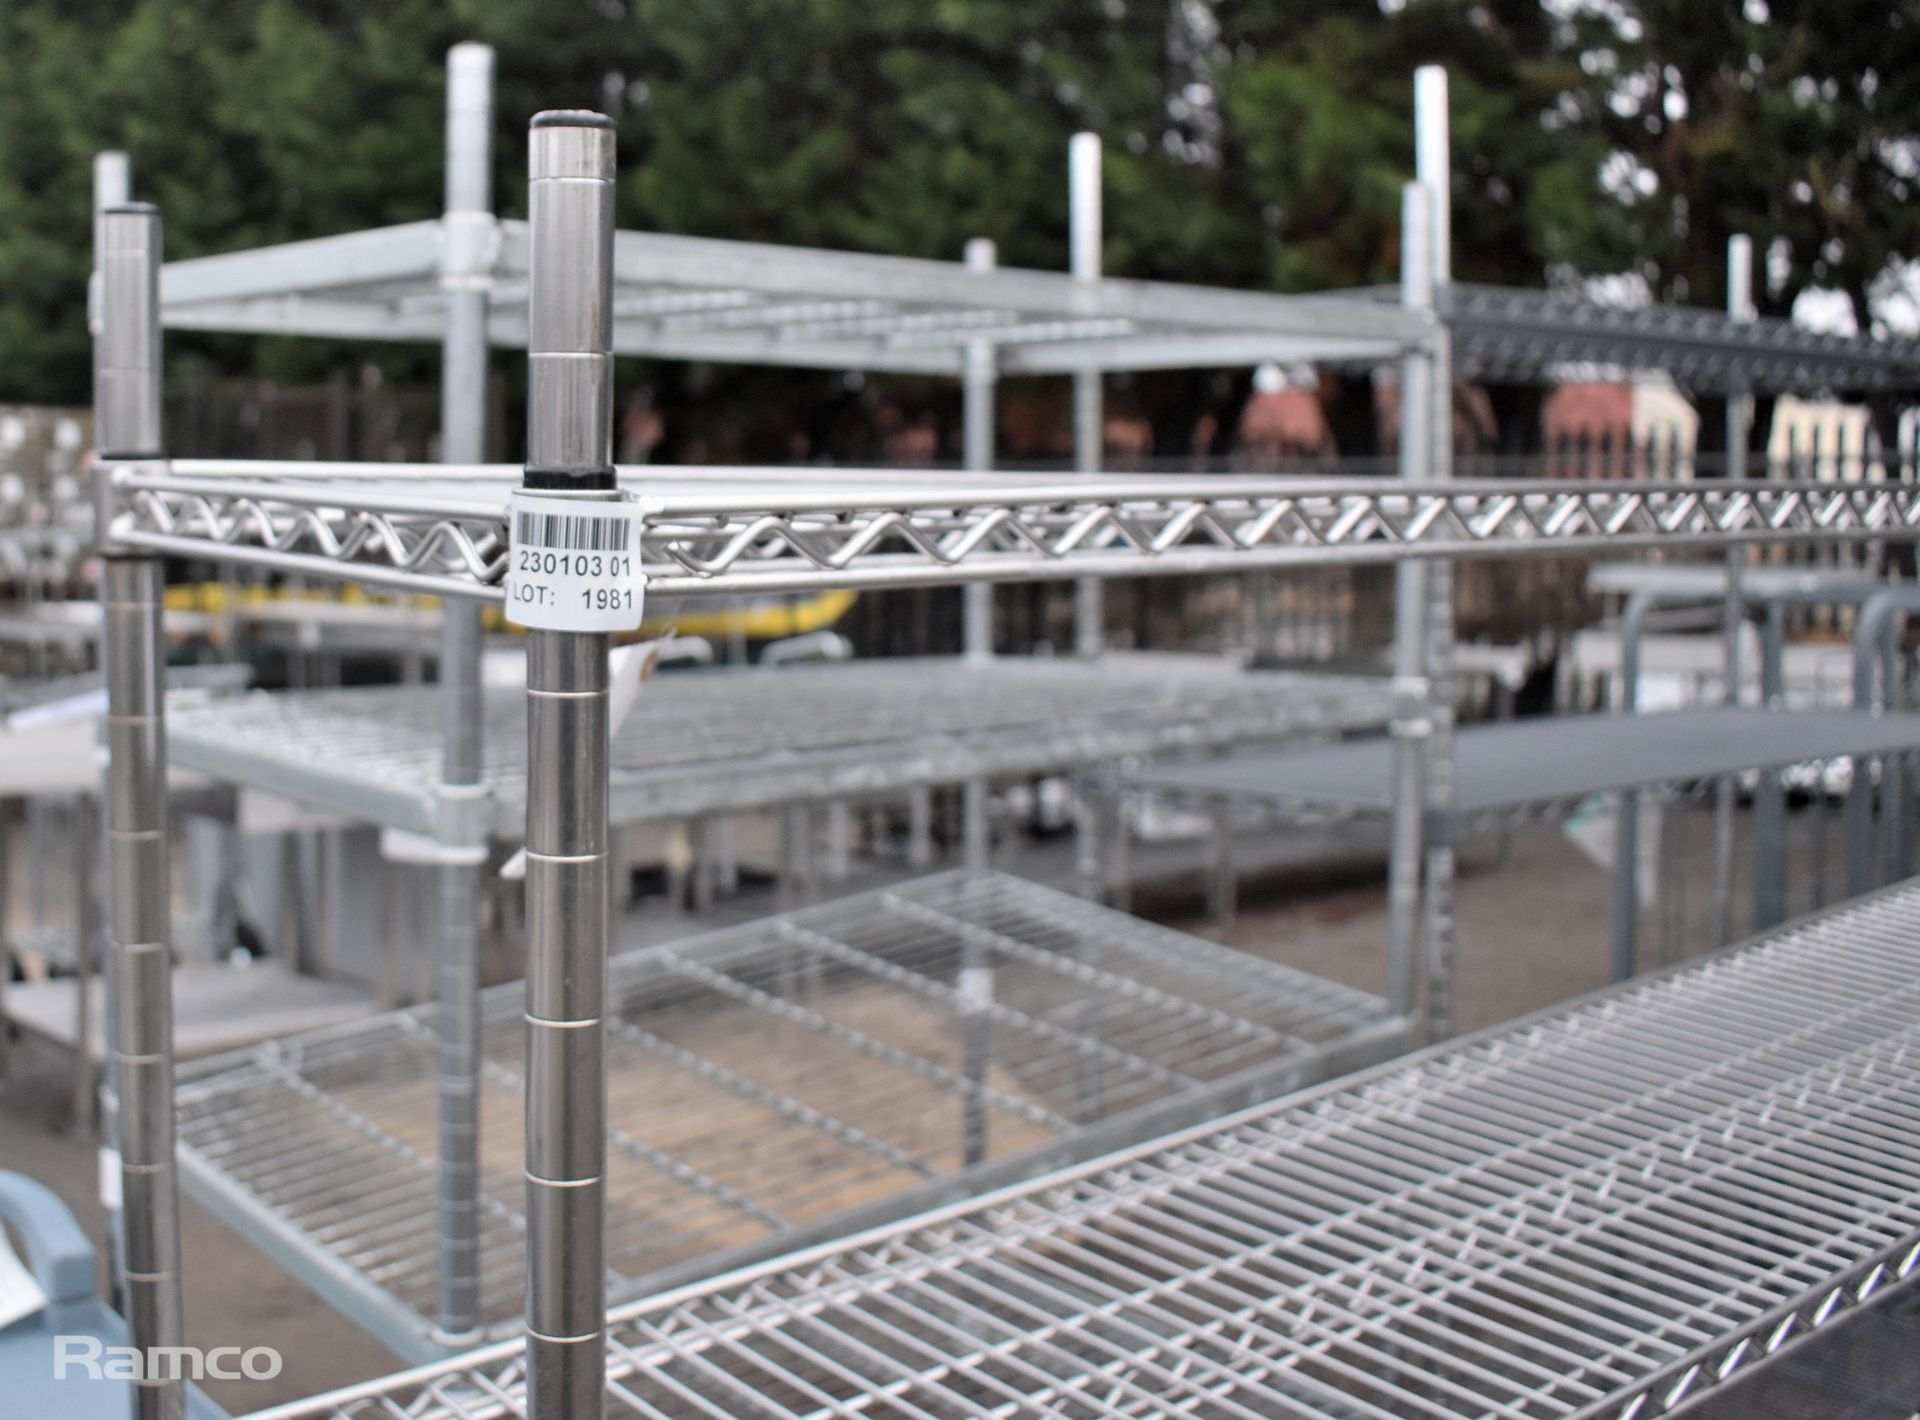 Stainless steel 4 tier wire racking - L179 x W38 x H167cm - Image 3 of 3